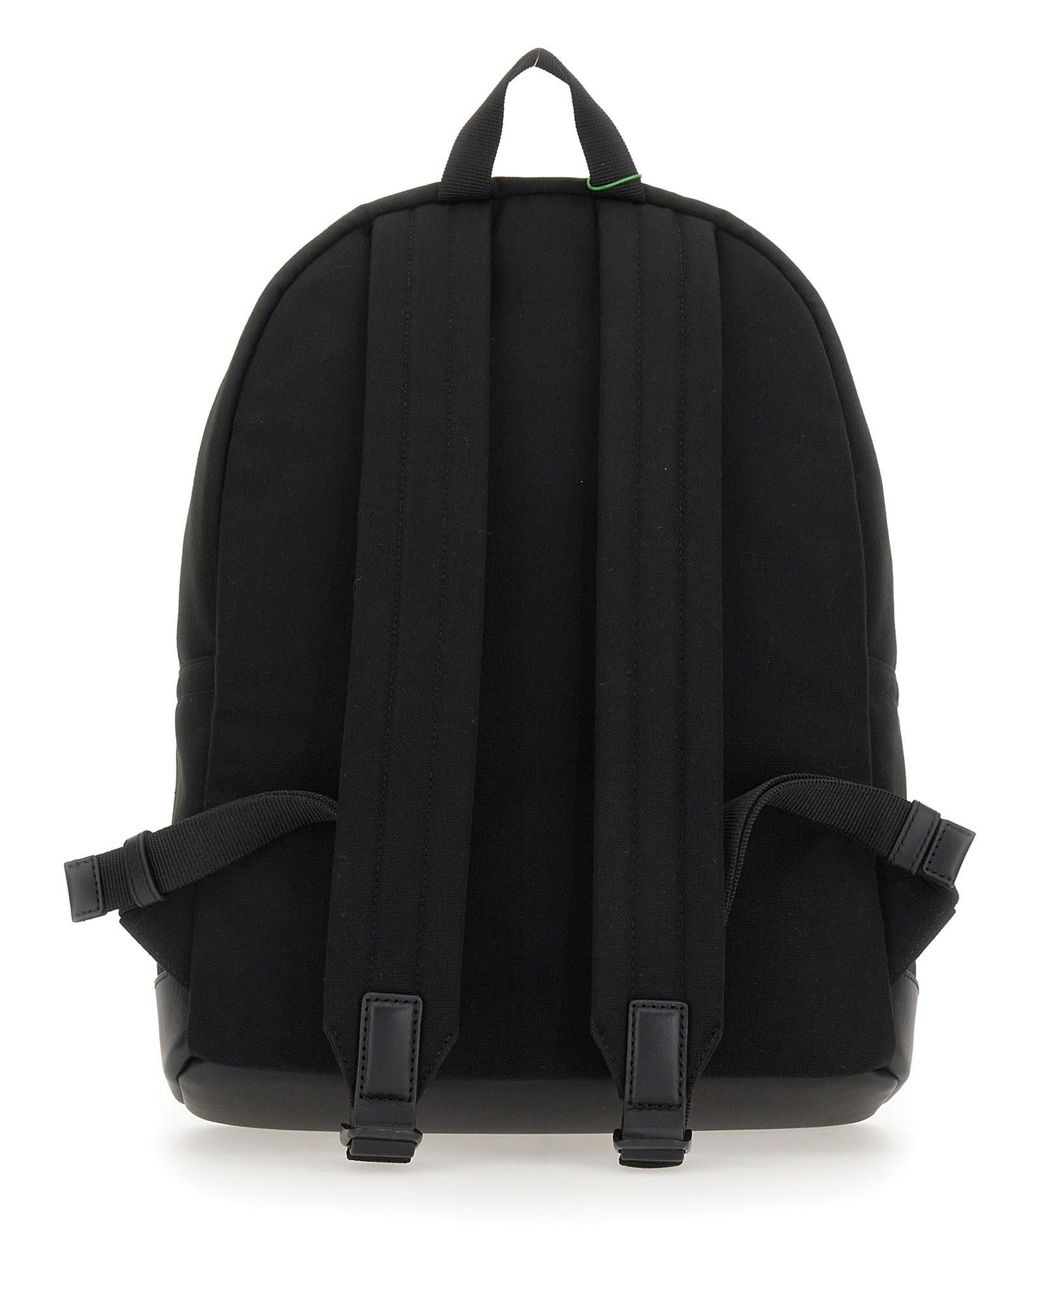 Off-White White Canvas Backpack, $445, SSENSE